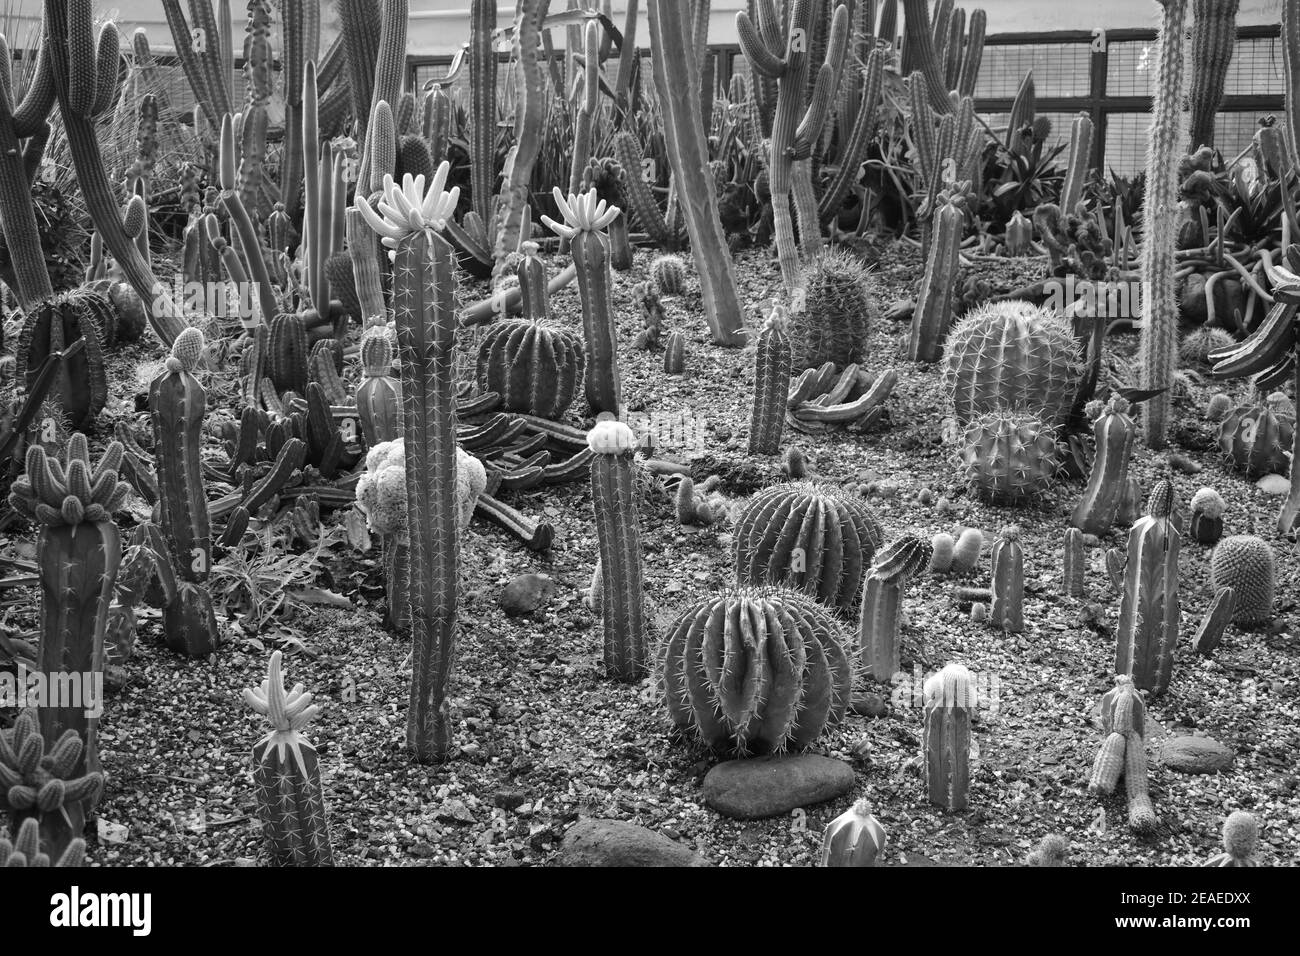 Different types of cacti and succulents in monochrome. Stock Photo